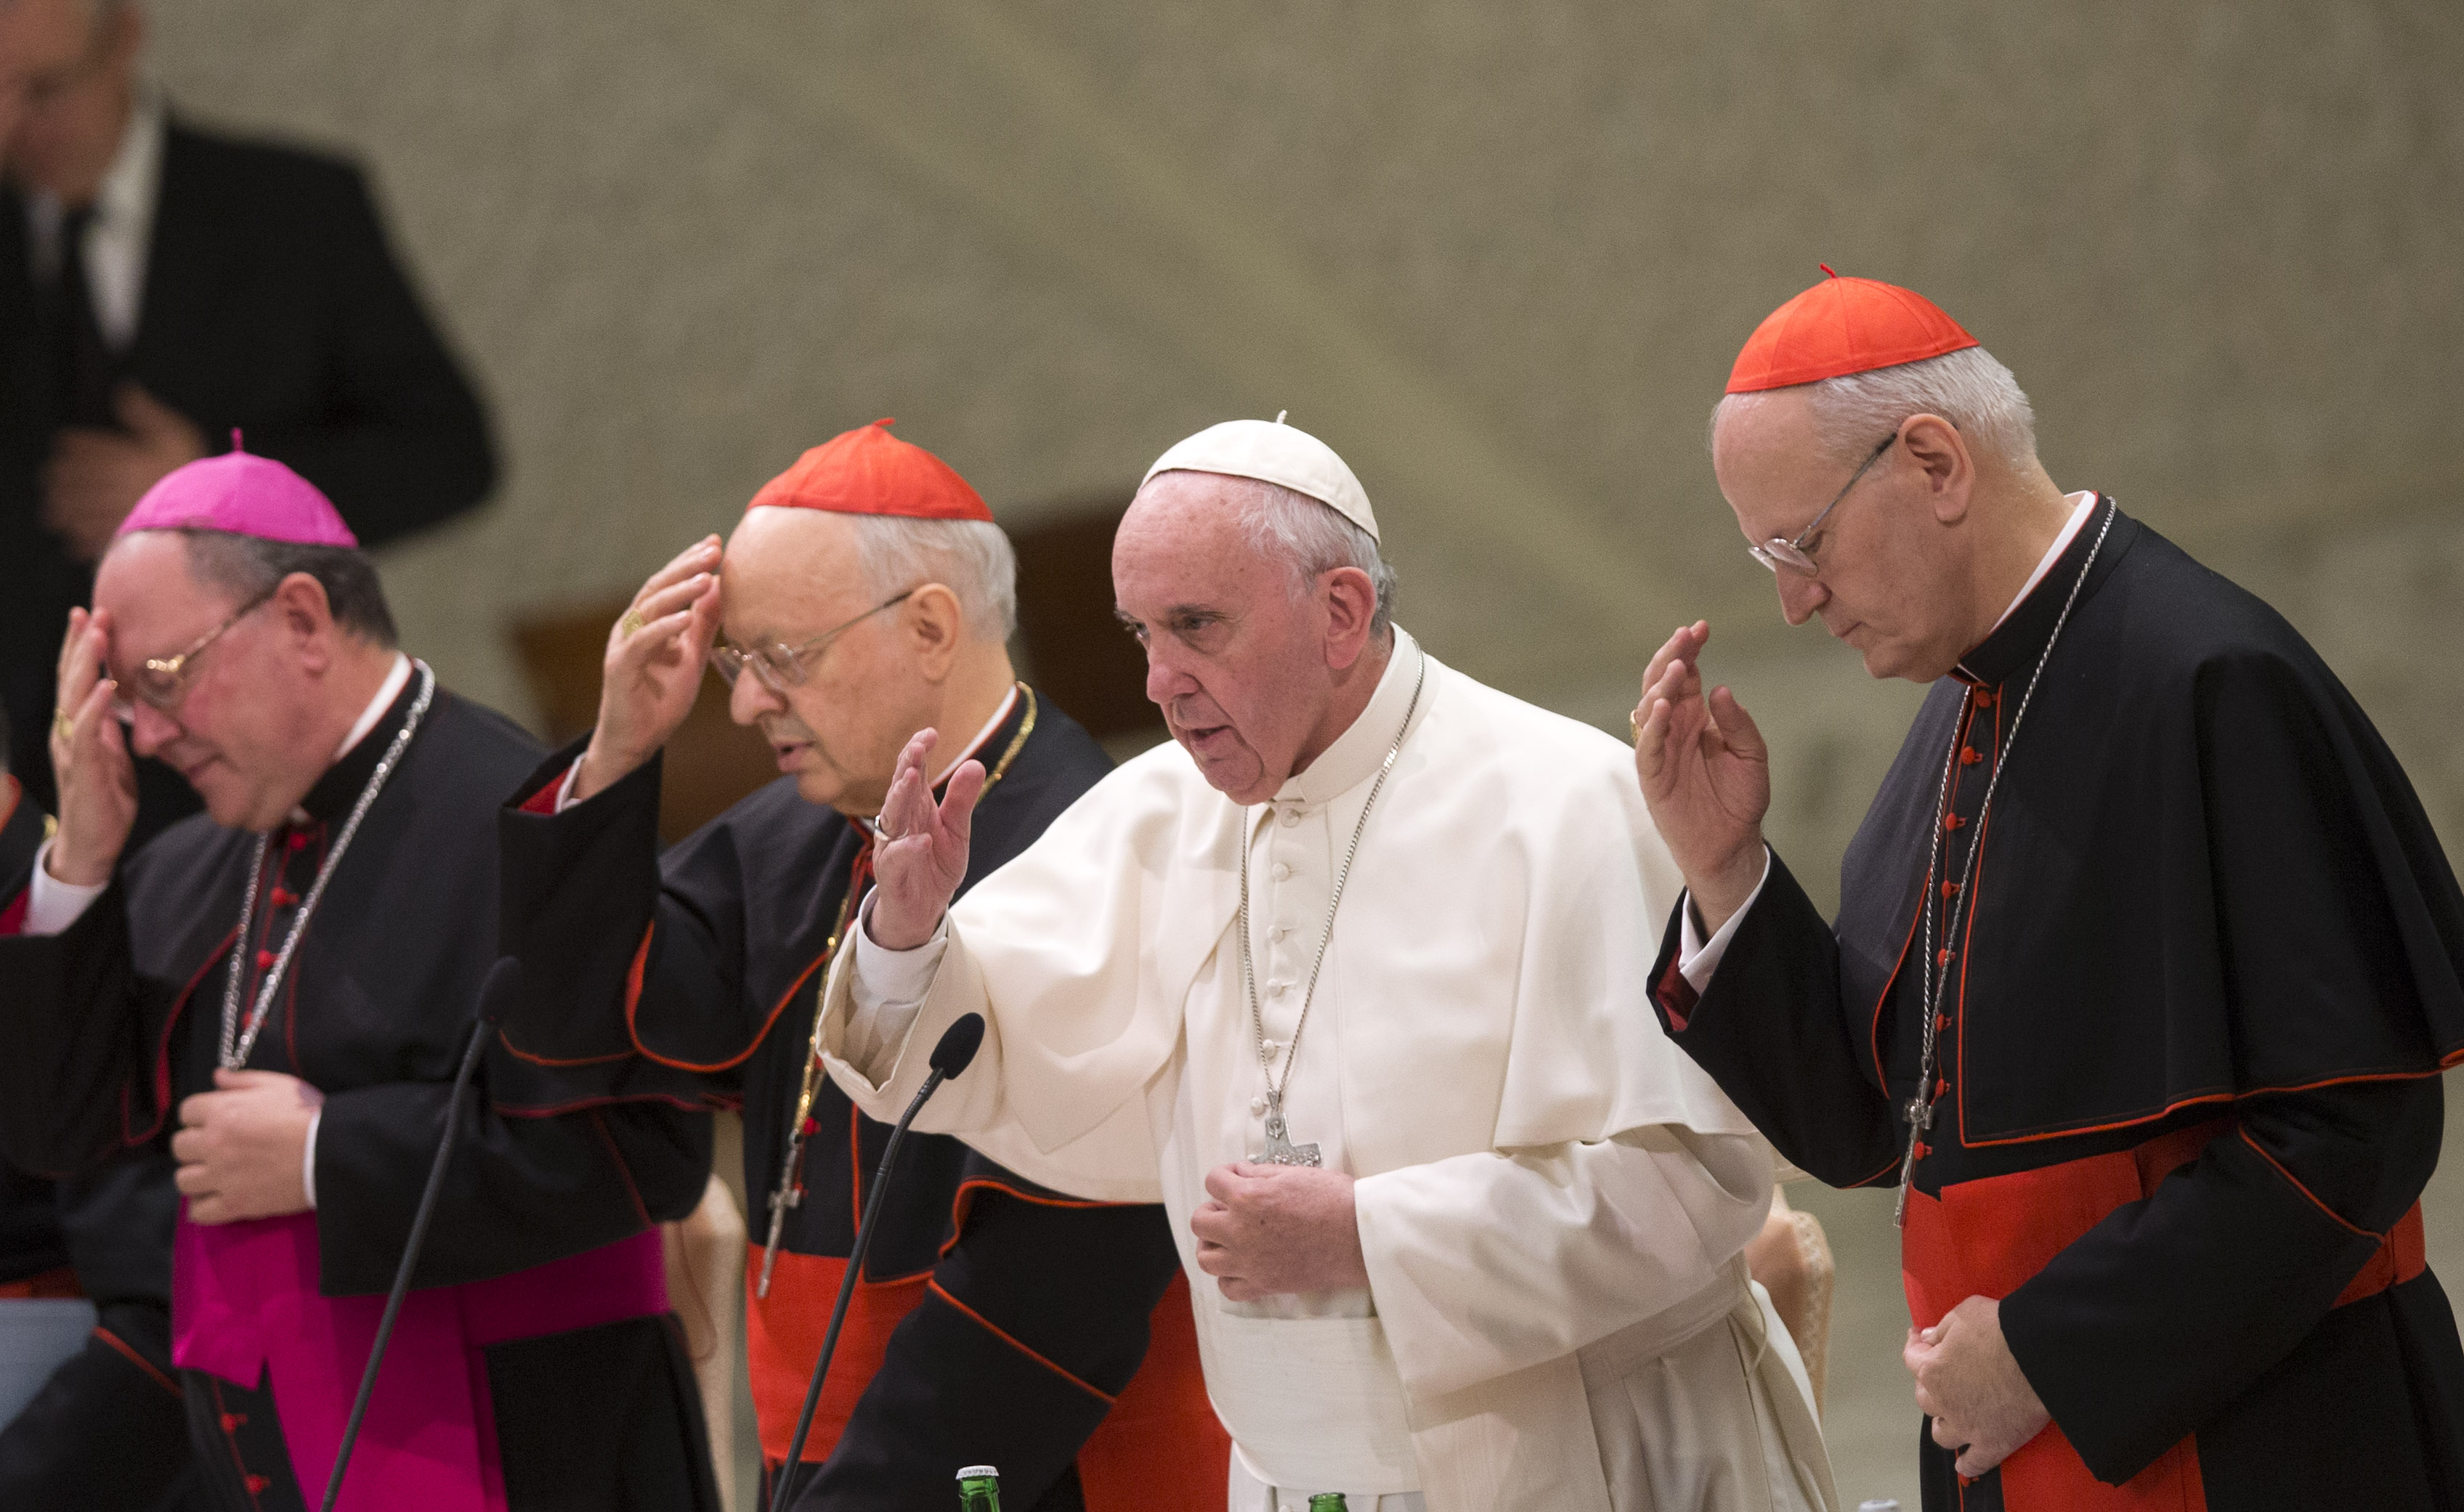 Pope Francis (second from right) delivers his blessing during a meeting marking the 50th anniversary of the creation of the Synod of Bishops, in the Paul VI hall at the Vatican, Saturday, on October 17, 2015. Photo: AP 